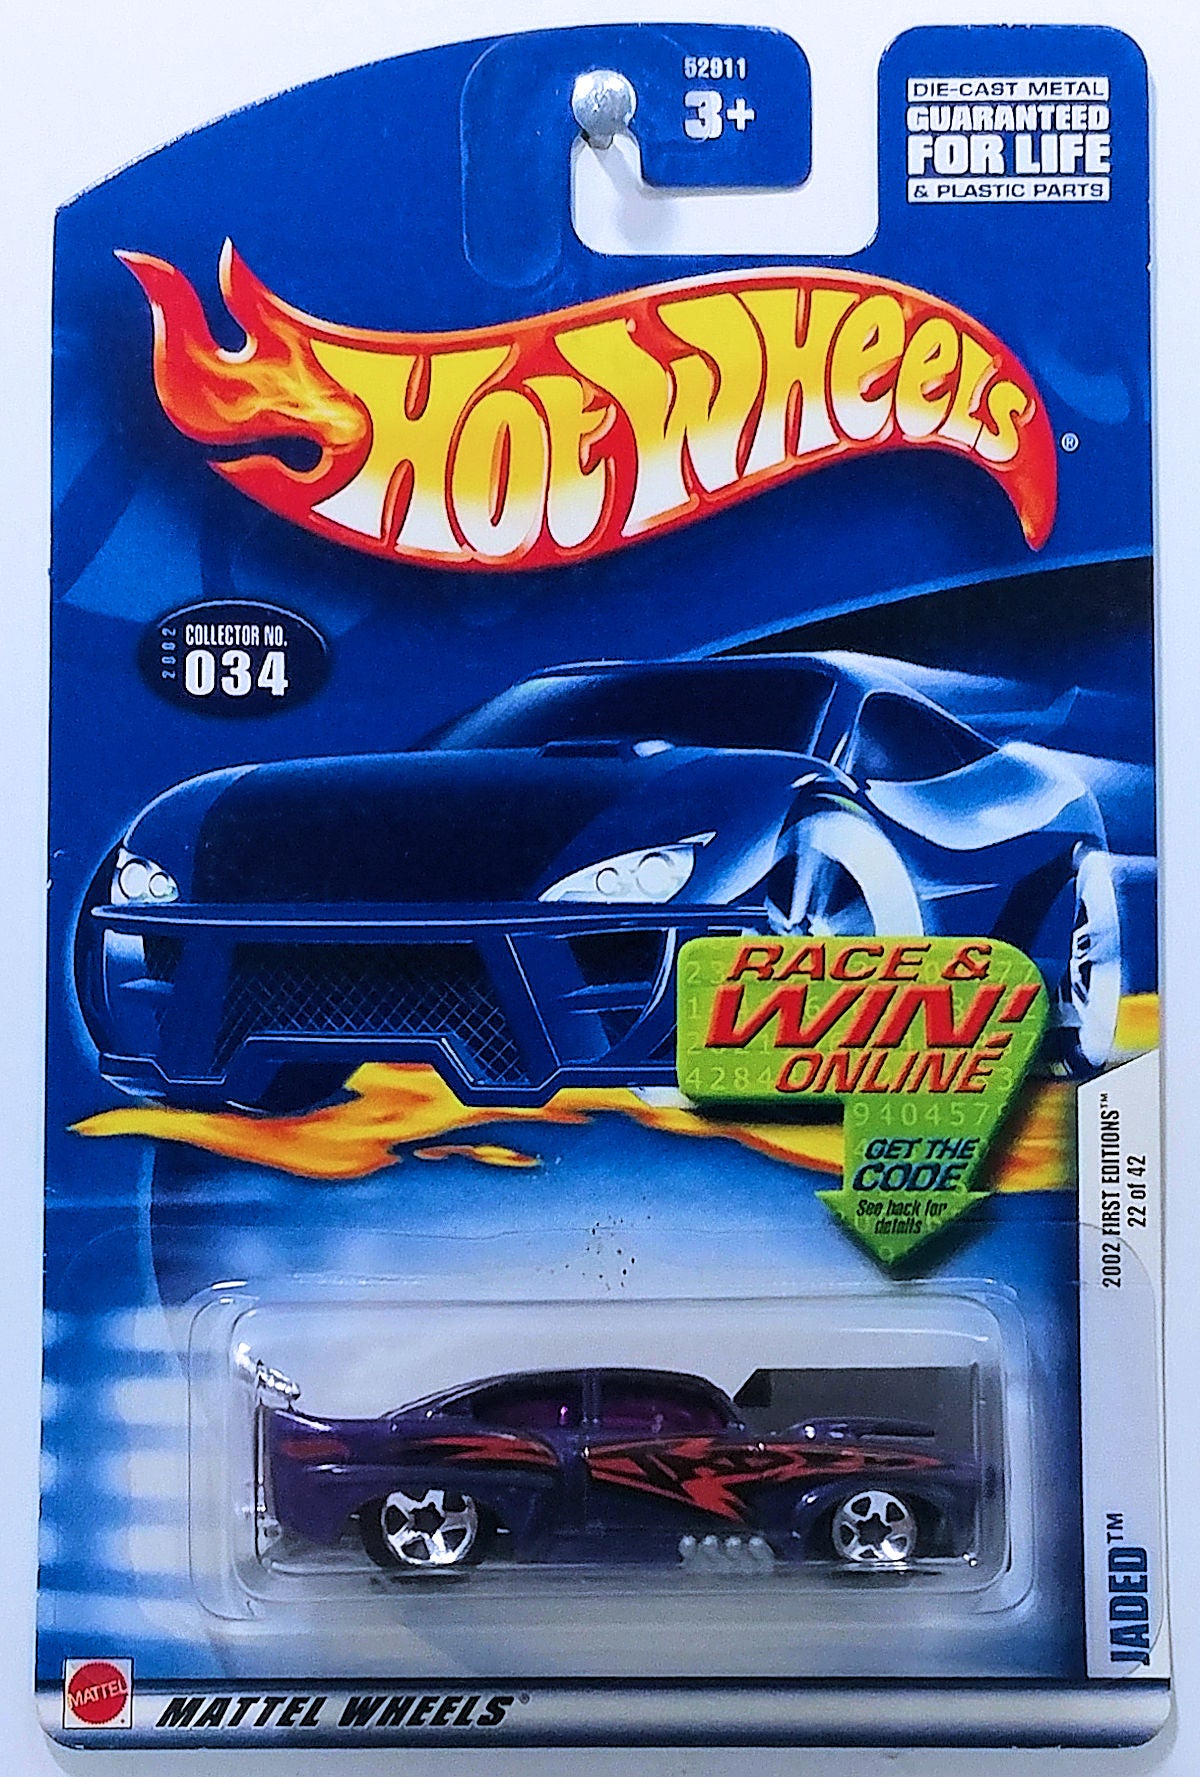 Hot Wheels 2002 - Collector # 034/240 - First Editions 22/42 - Jaded - Purple - 5 Spoke - USA 'RW'